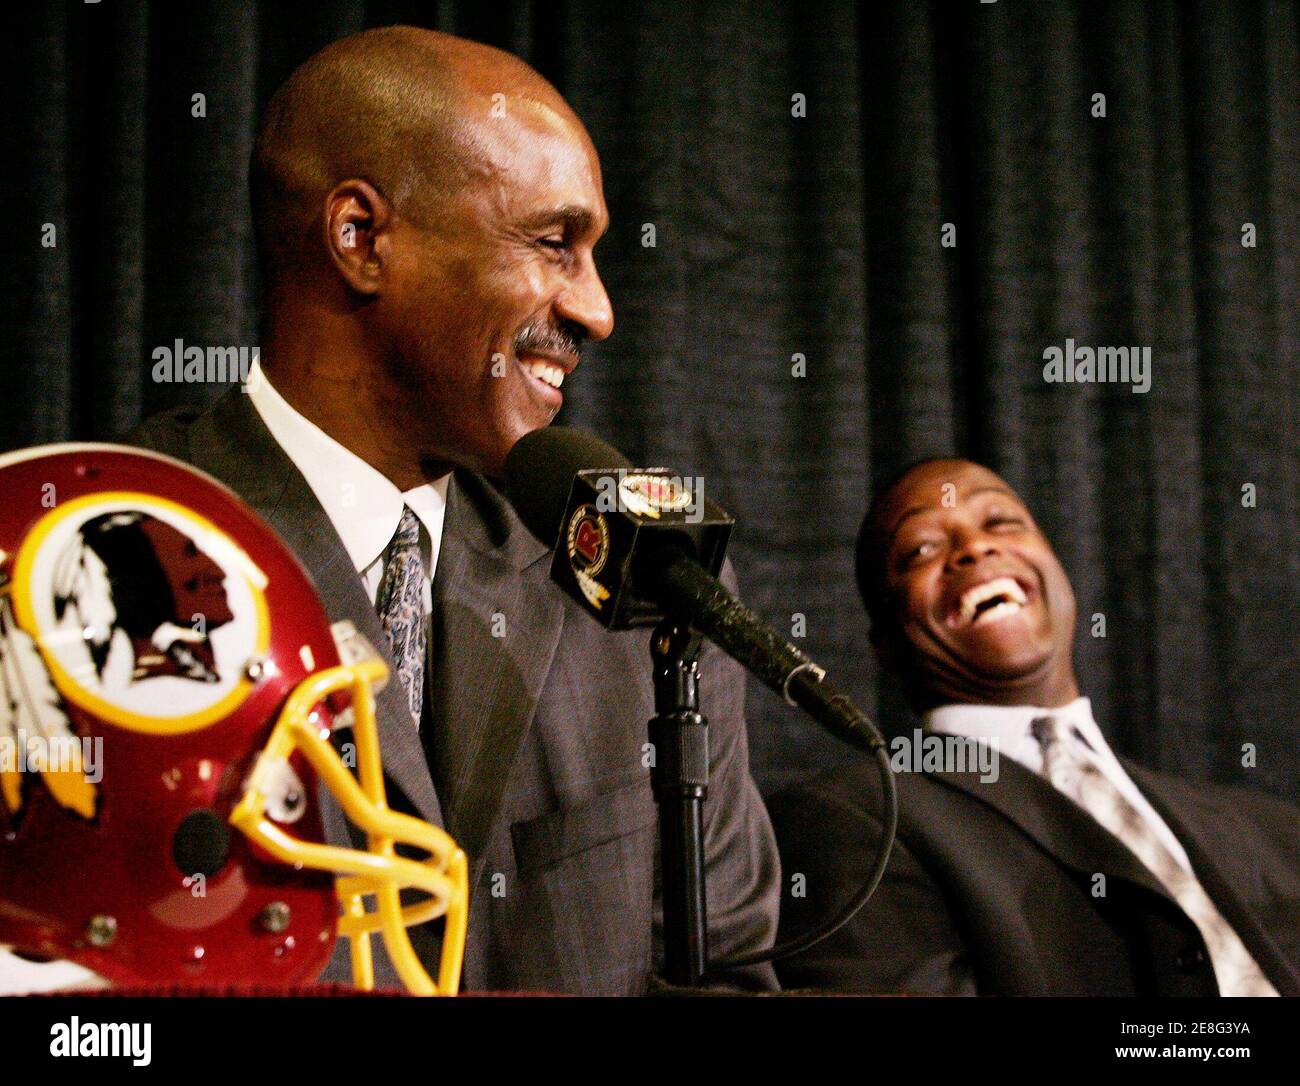 Former Washington Redskins players Darrell Green (R) and Art Monk laugh during a news conference at the team facility in Ashburn, Virginia on February 5, 2008. Both players will be inducted into the NFL Pro Football Hall of Fame in Canton, Ohio on August 2, 2008.      REUTERS/Gary Cameron   (UNITED STATES) REUTERS Stock Photo